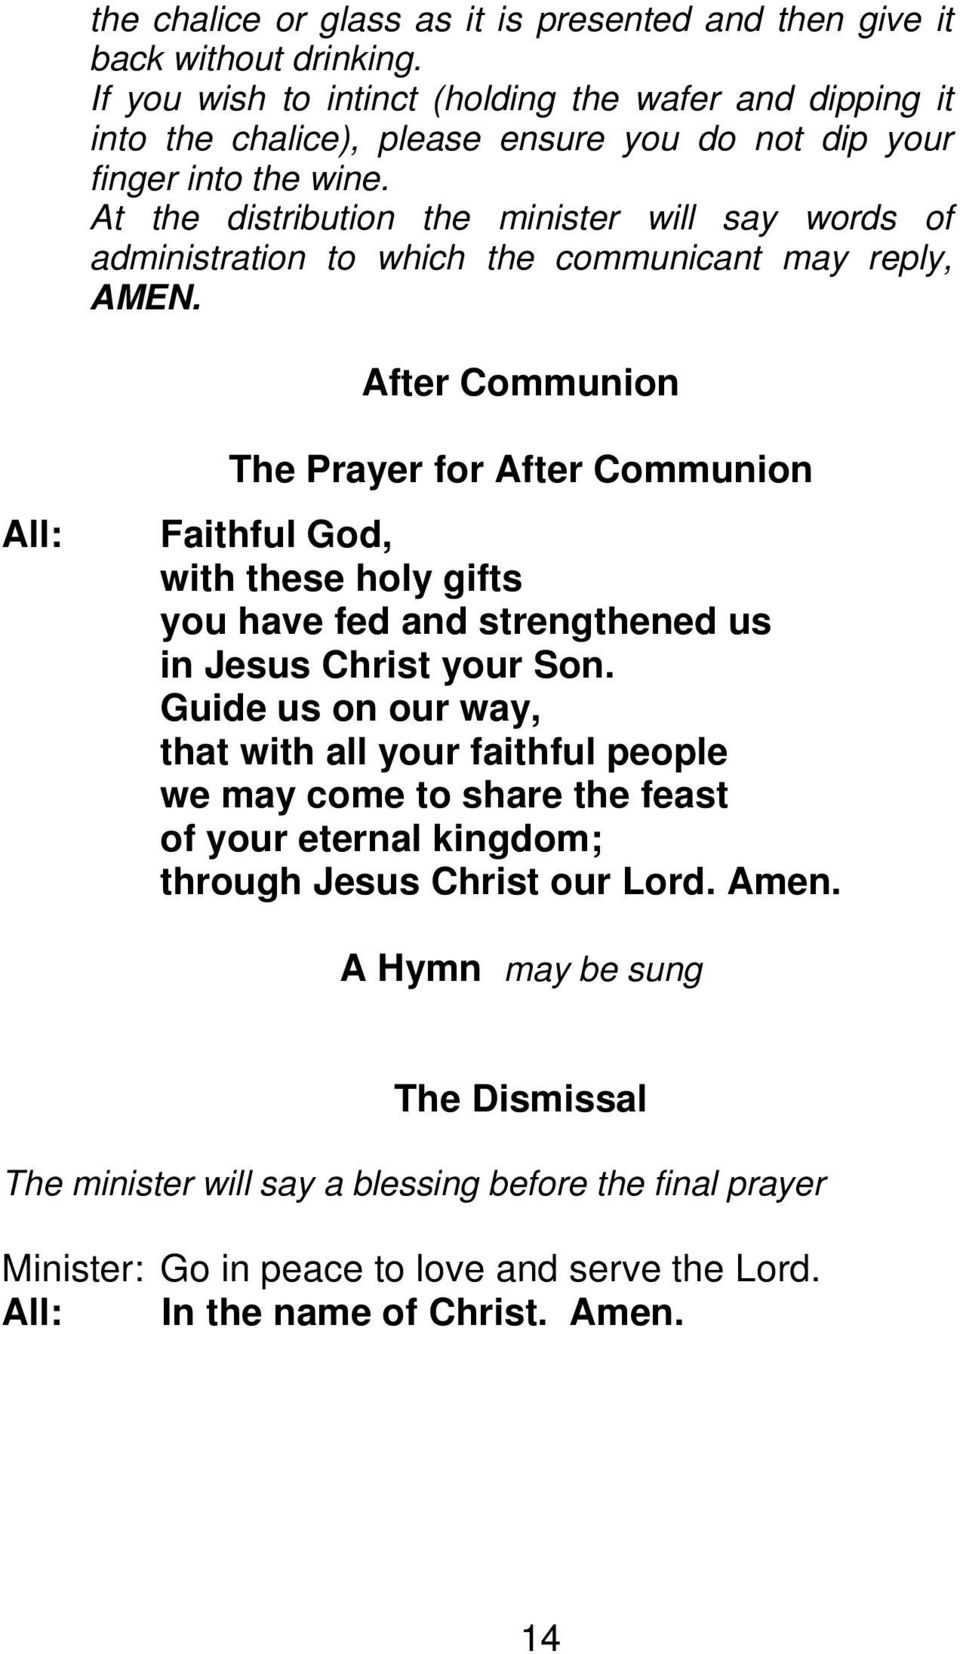 At the distribution the minister will say words of administration to which the communicant may reply, AMEN.